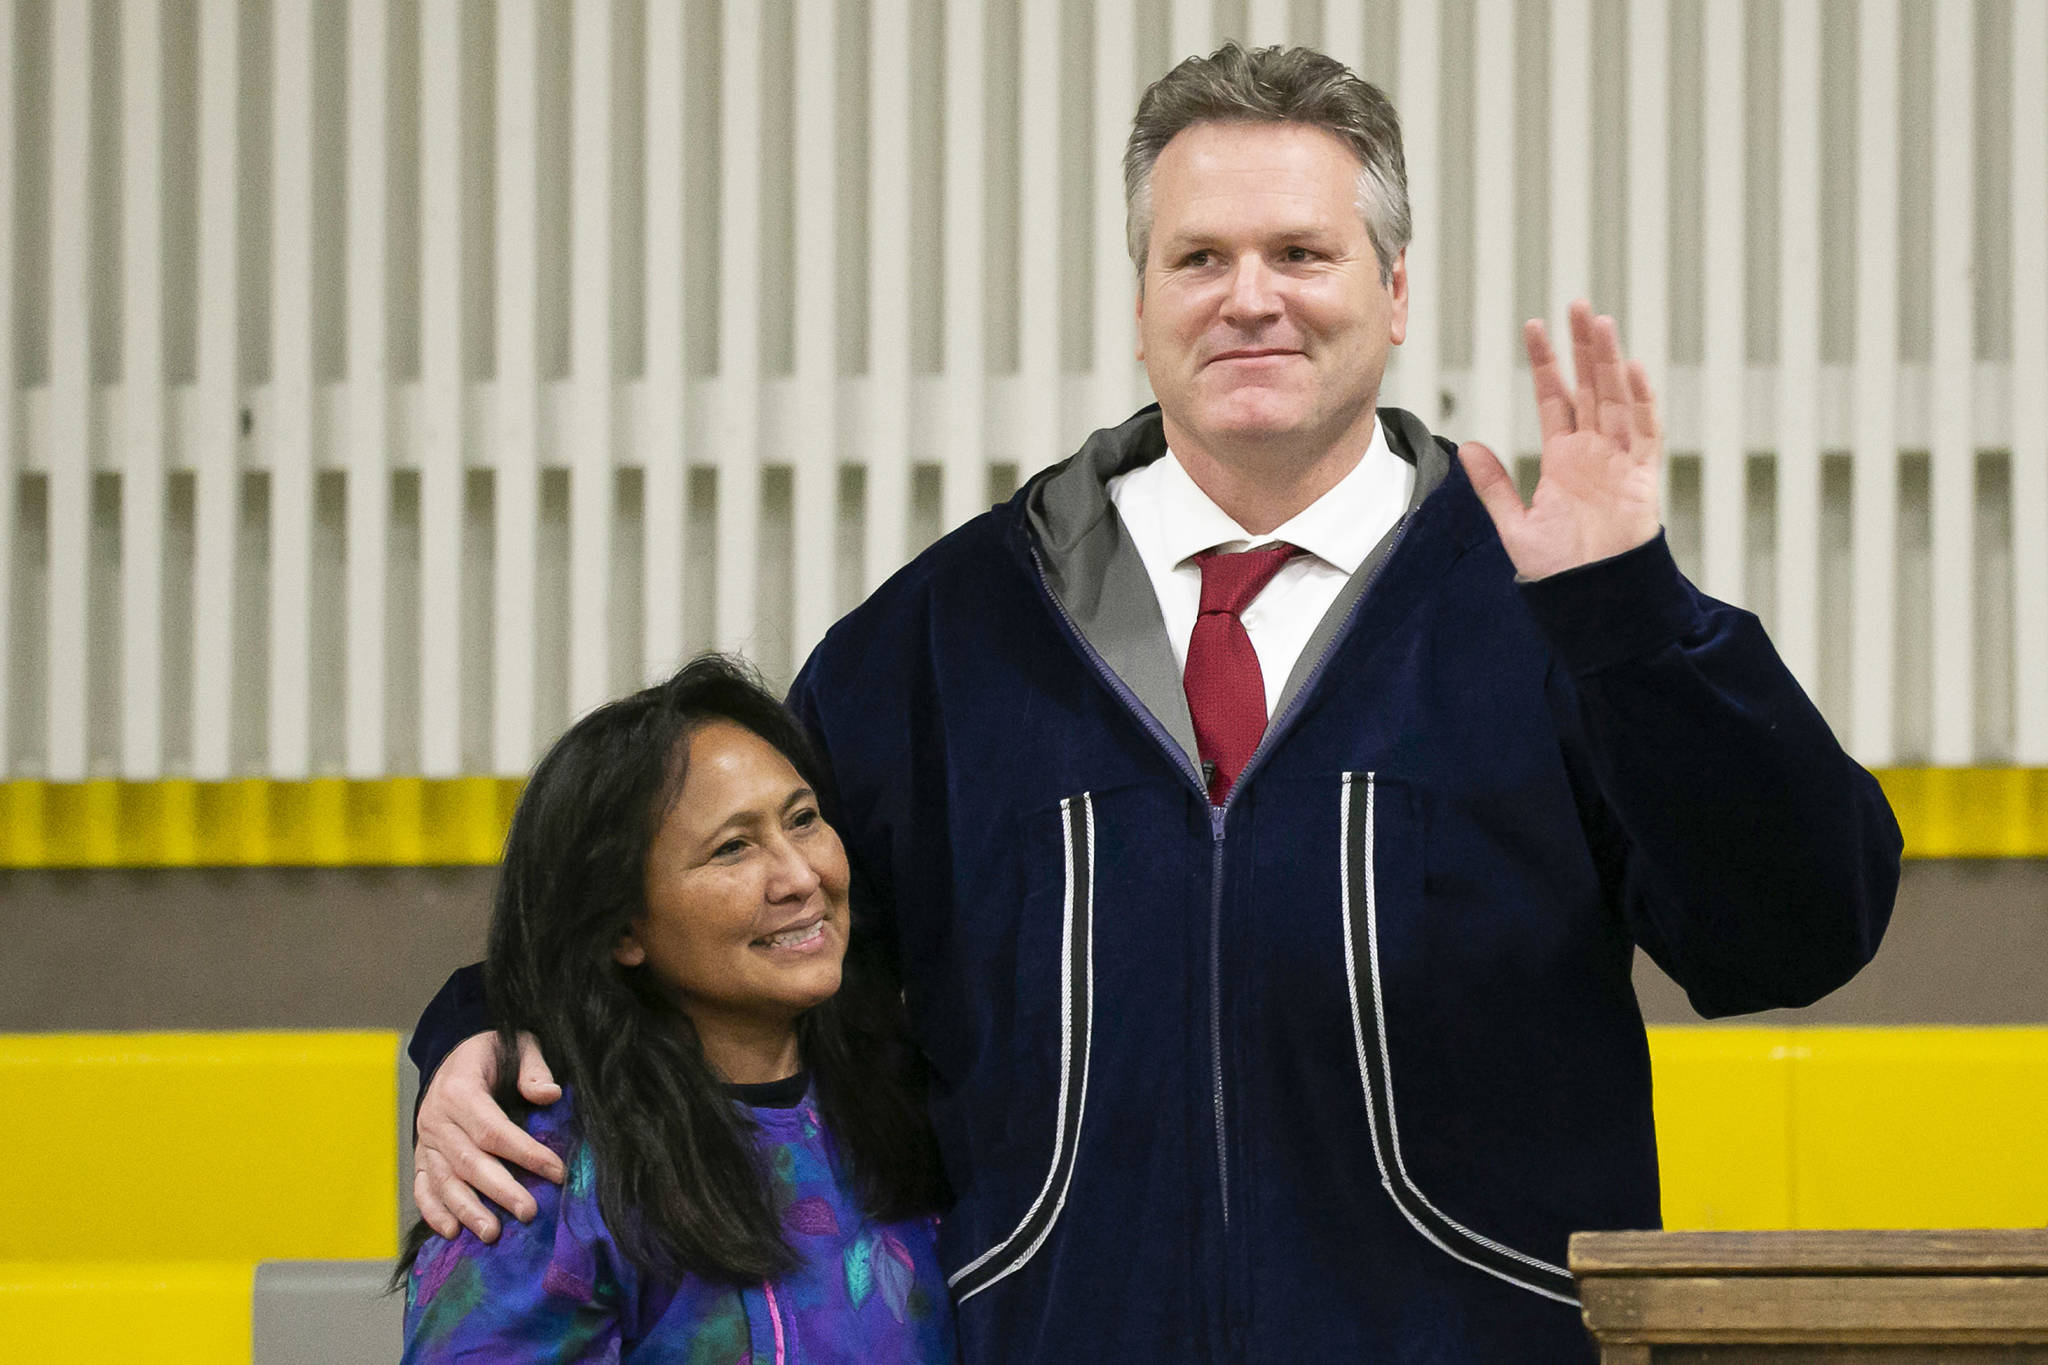 Alaska Gov. Mike Dunleavy poses with first lady Rose Dunleavy after he was sworn into office Monday, Dec. 3, 2018, in Kotzebue, Alaska. He had originally planned the ceremony in her hometown of Noorvik, Alaska, but poor weather prevented his plane from landing there and the ceremony was moved to Kotzebue.(Stanley Wright | Alaska Governor’s Office via AP)